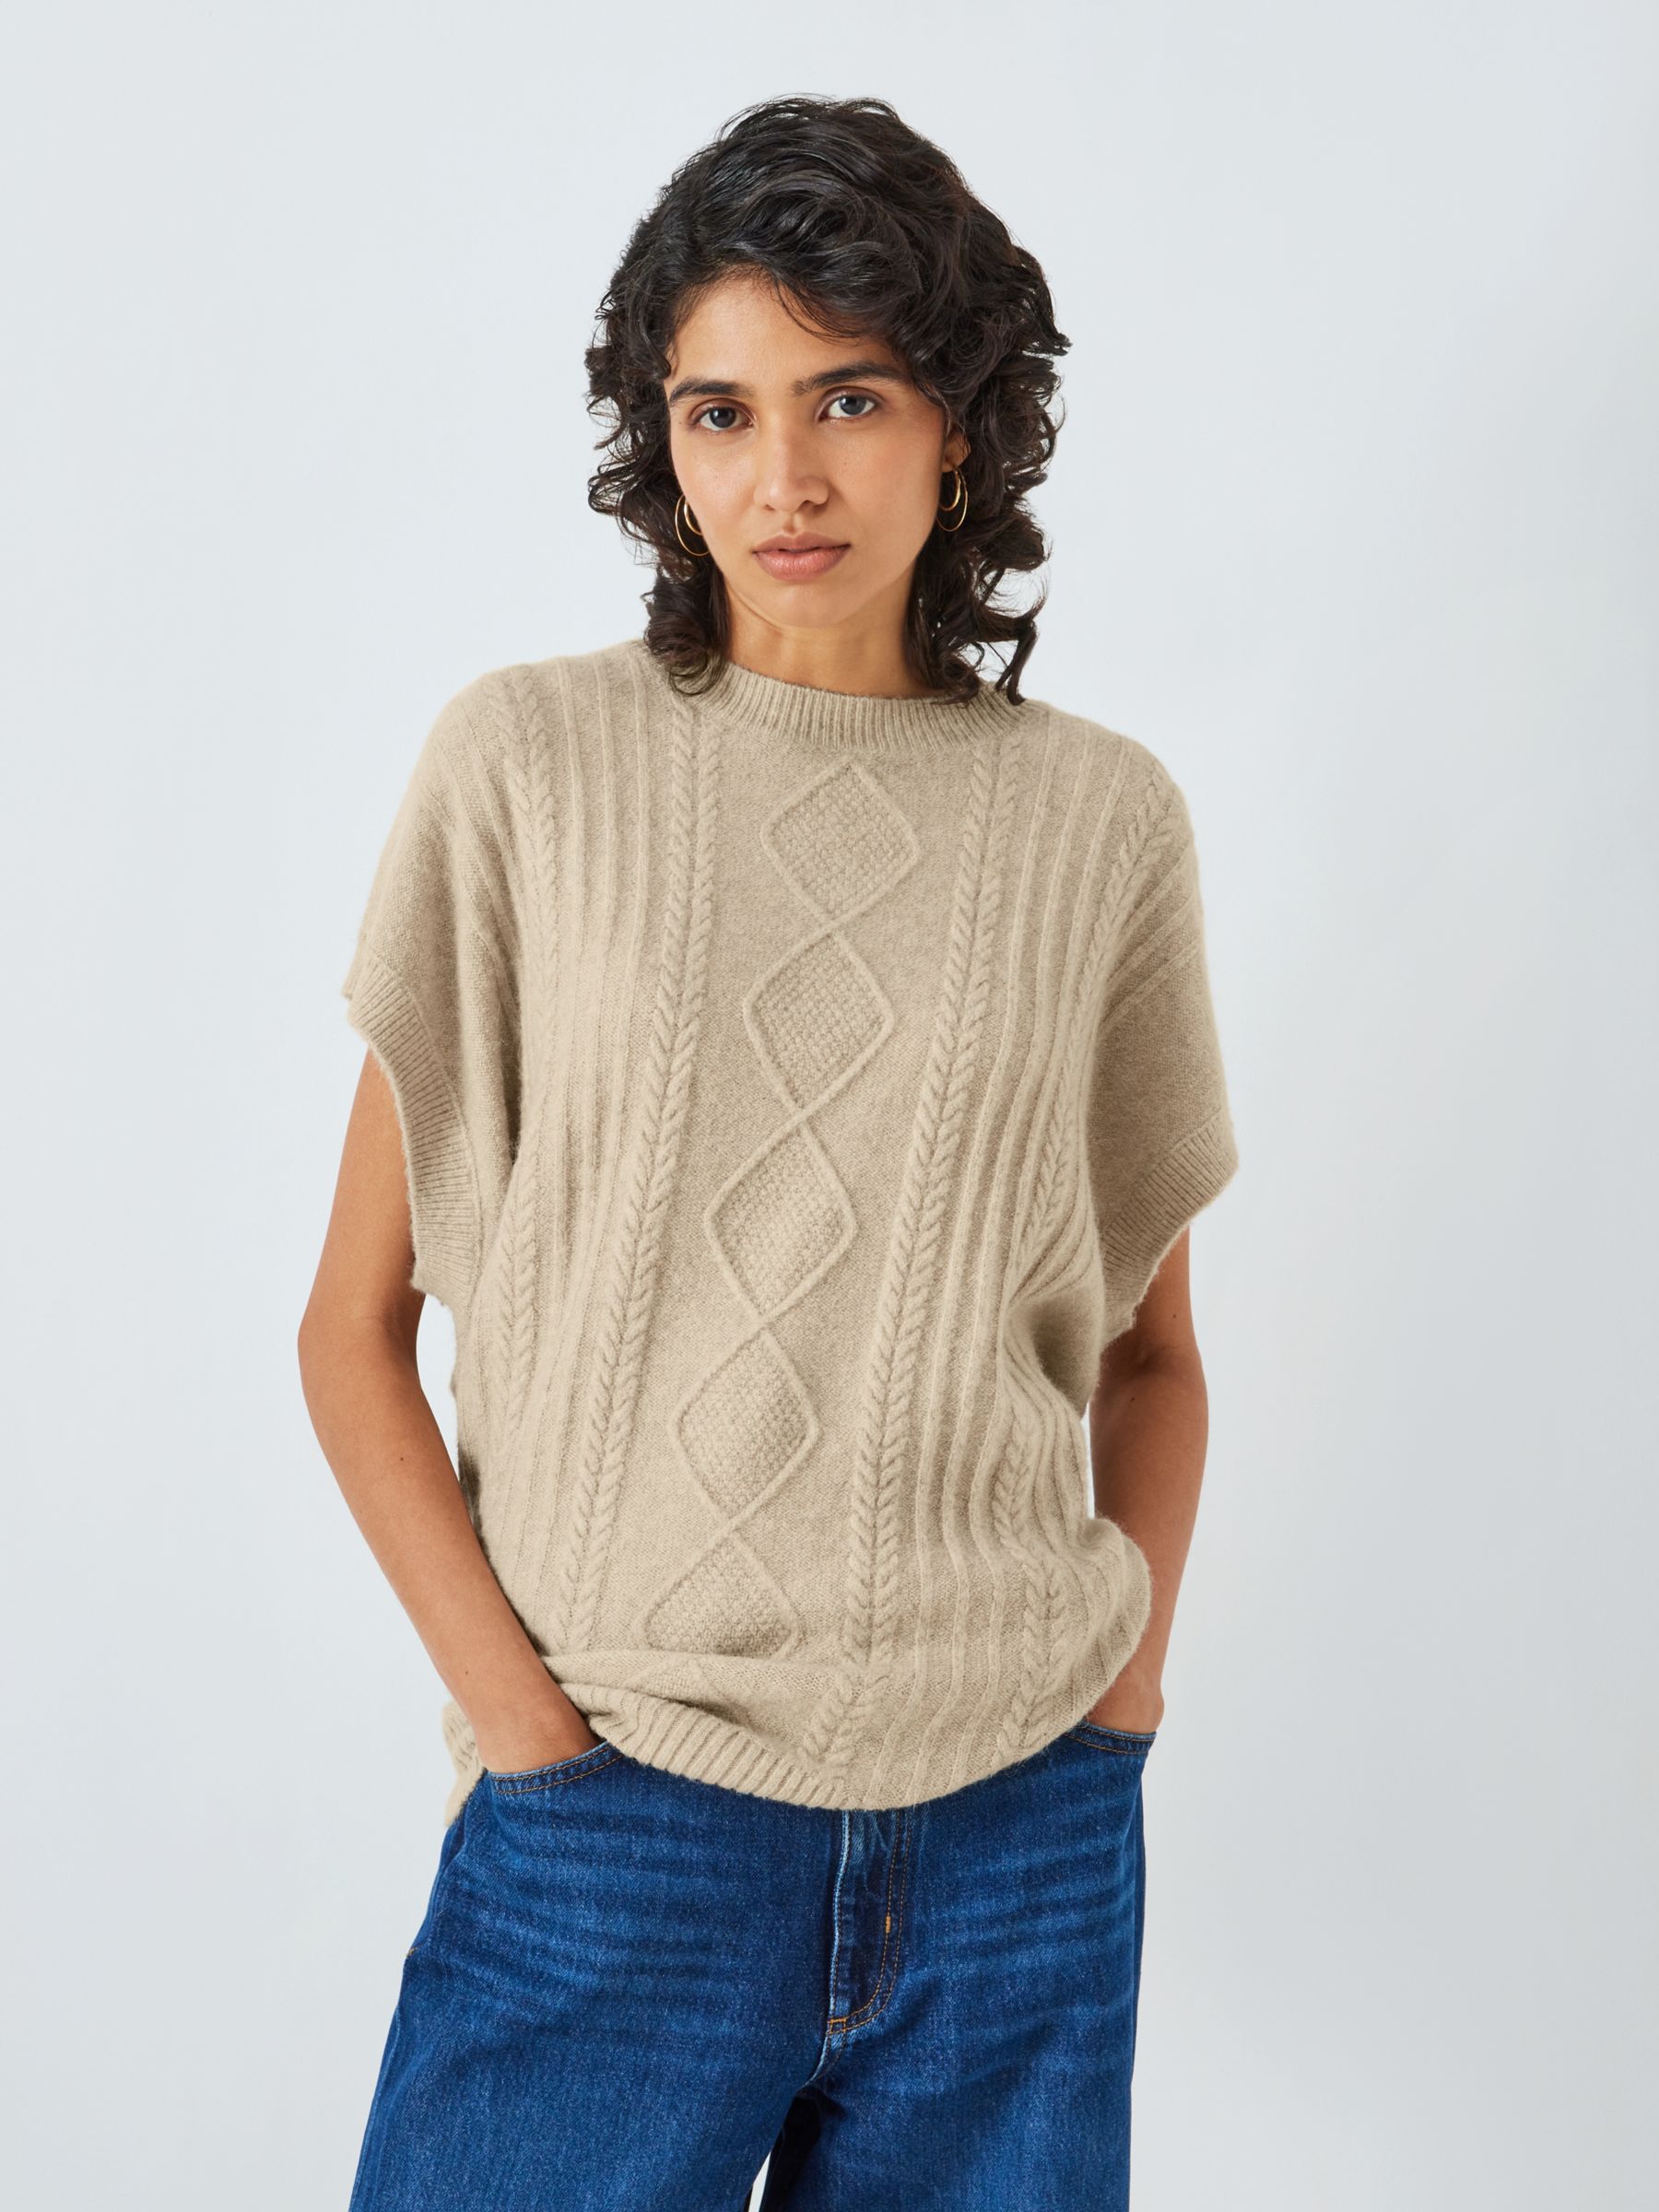 Buy Oatmeal Cable Knit Tank Top 8 | Hoodies and sweatshirts | Argos